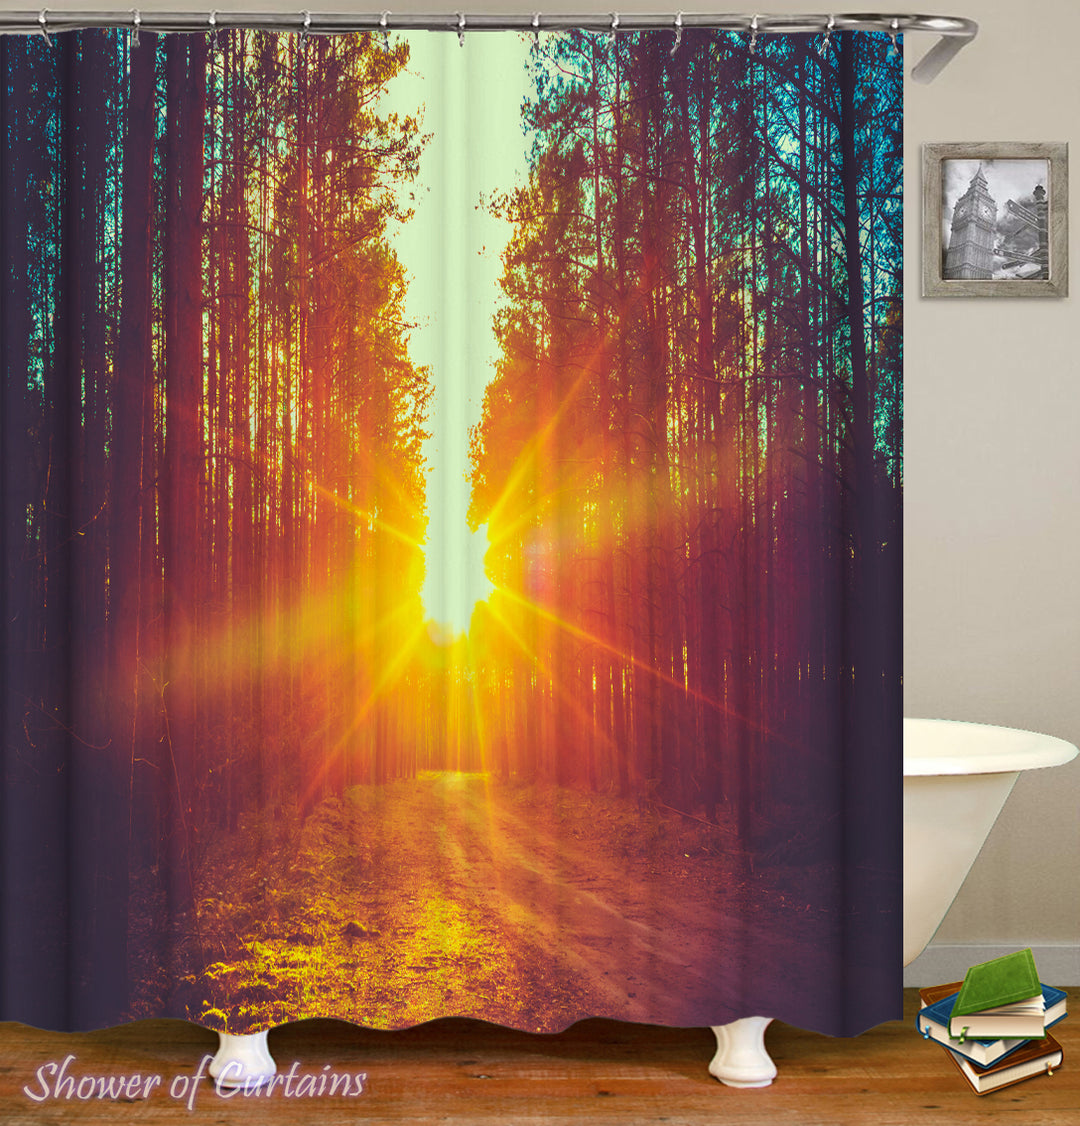 Country shower curtains - Sunset In The Woods